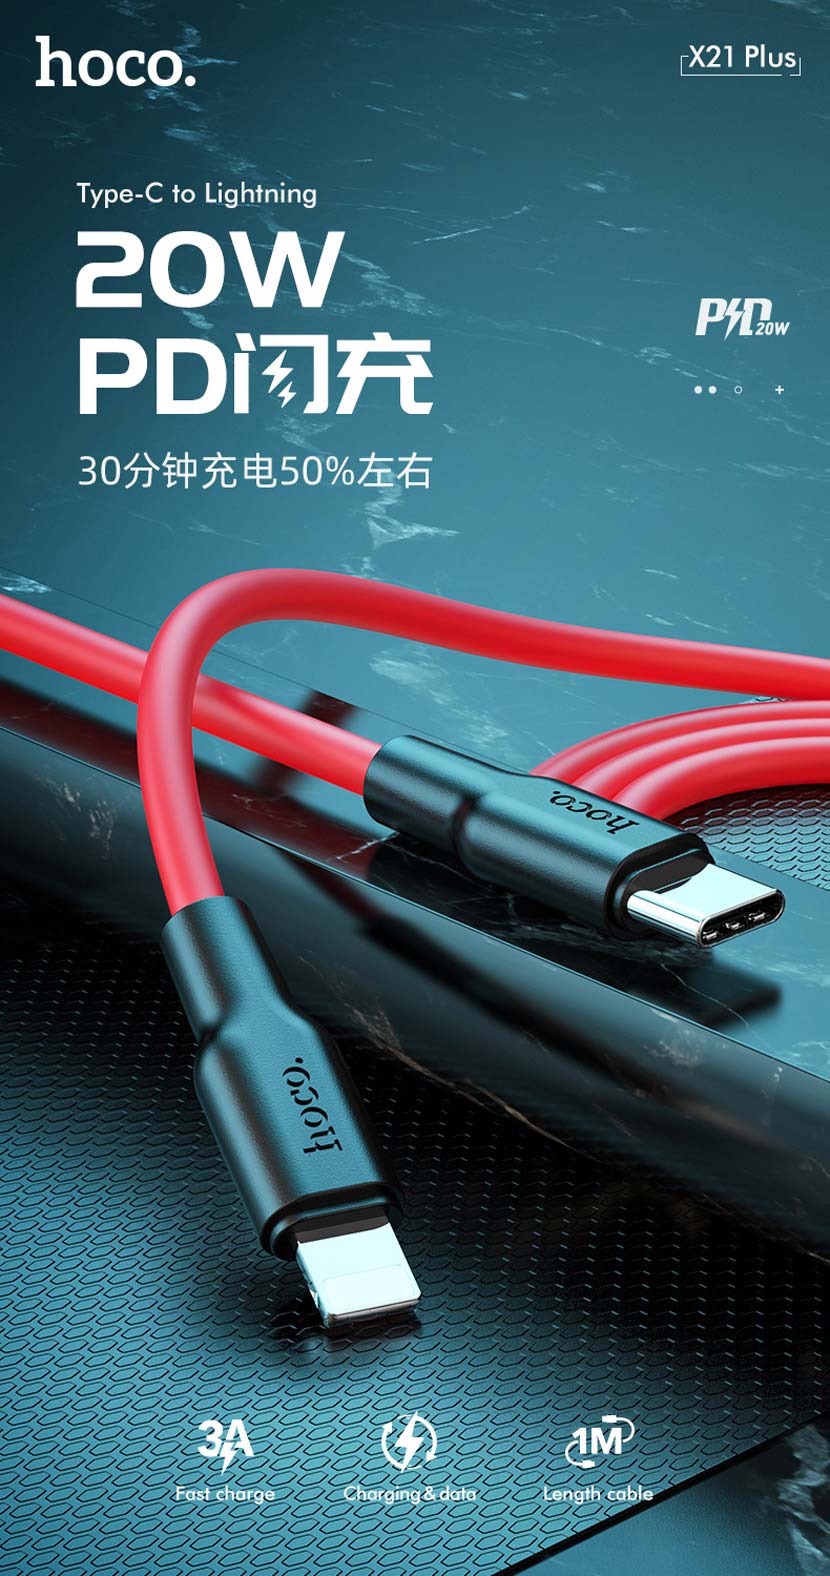 hoco news x21 plus silicone pd charging data cable cn